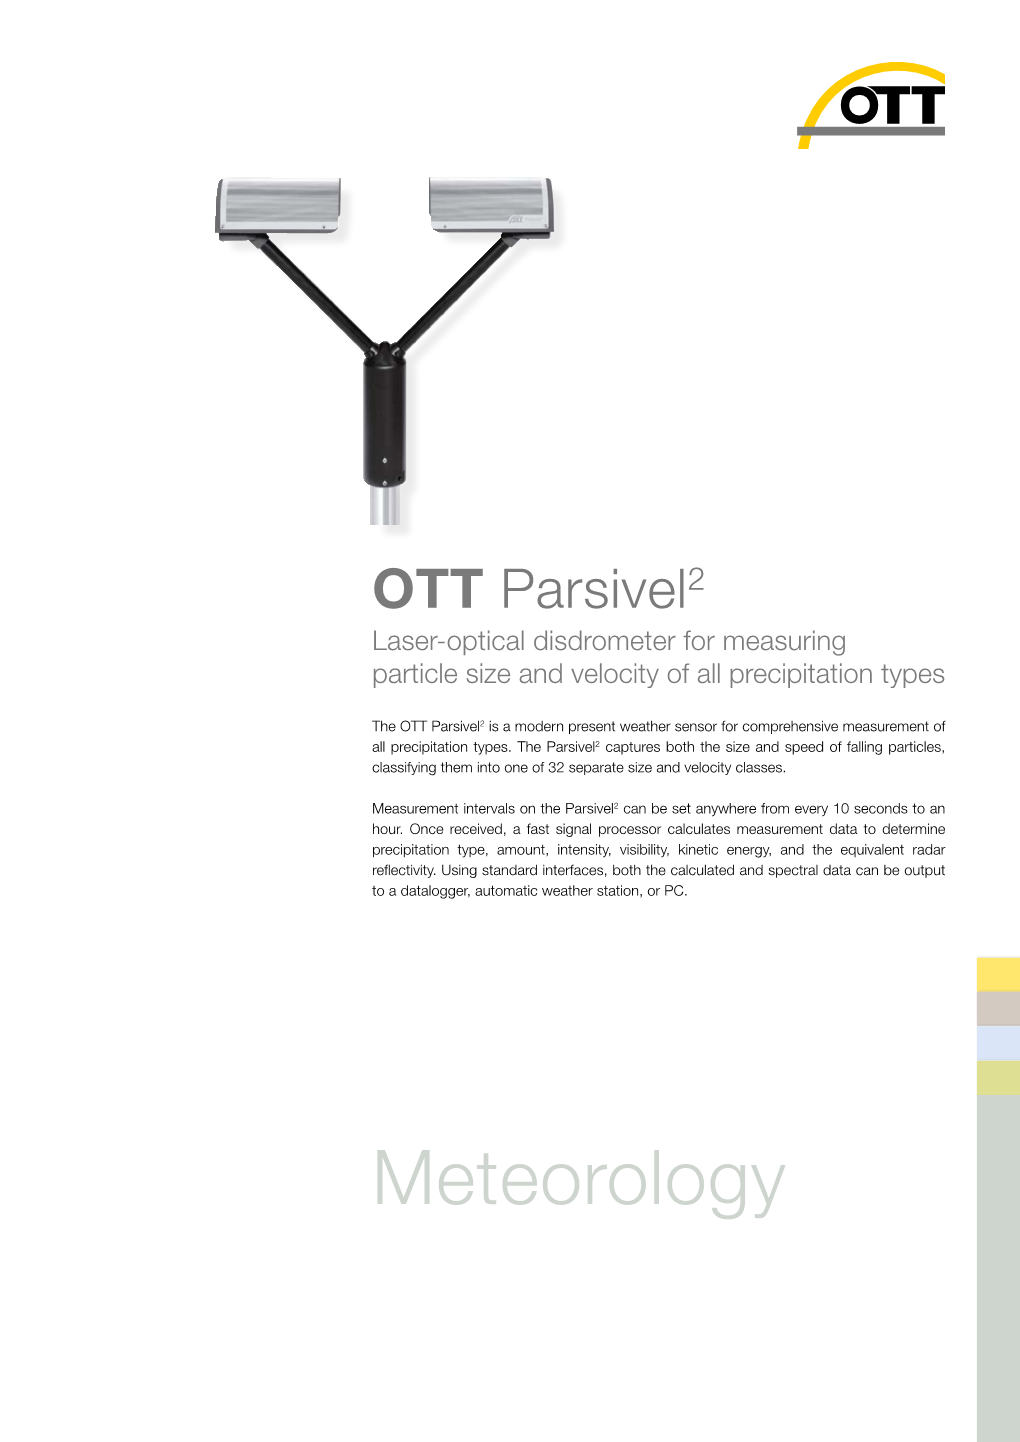 OTT Parsivel2 Laser-Optical Disdrometer for Measuring Particle Size and Velocity of All Precipitation Types